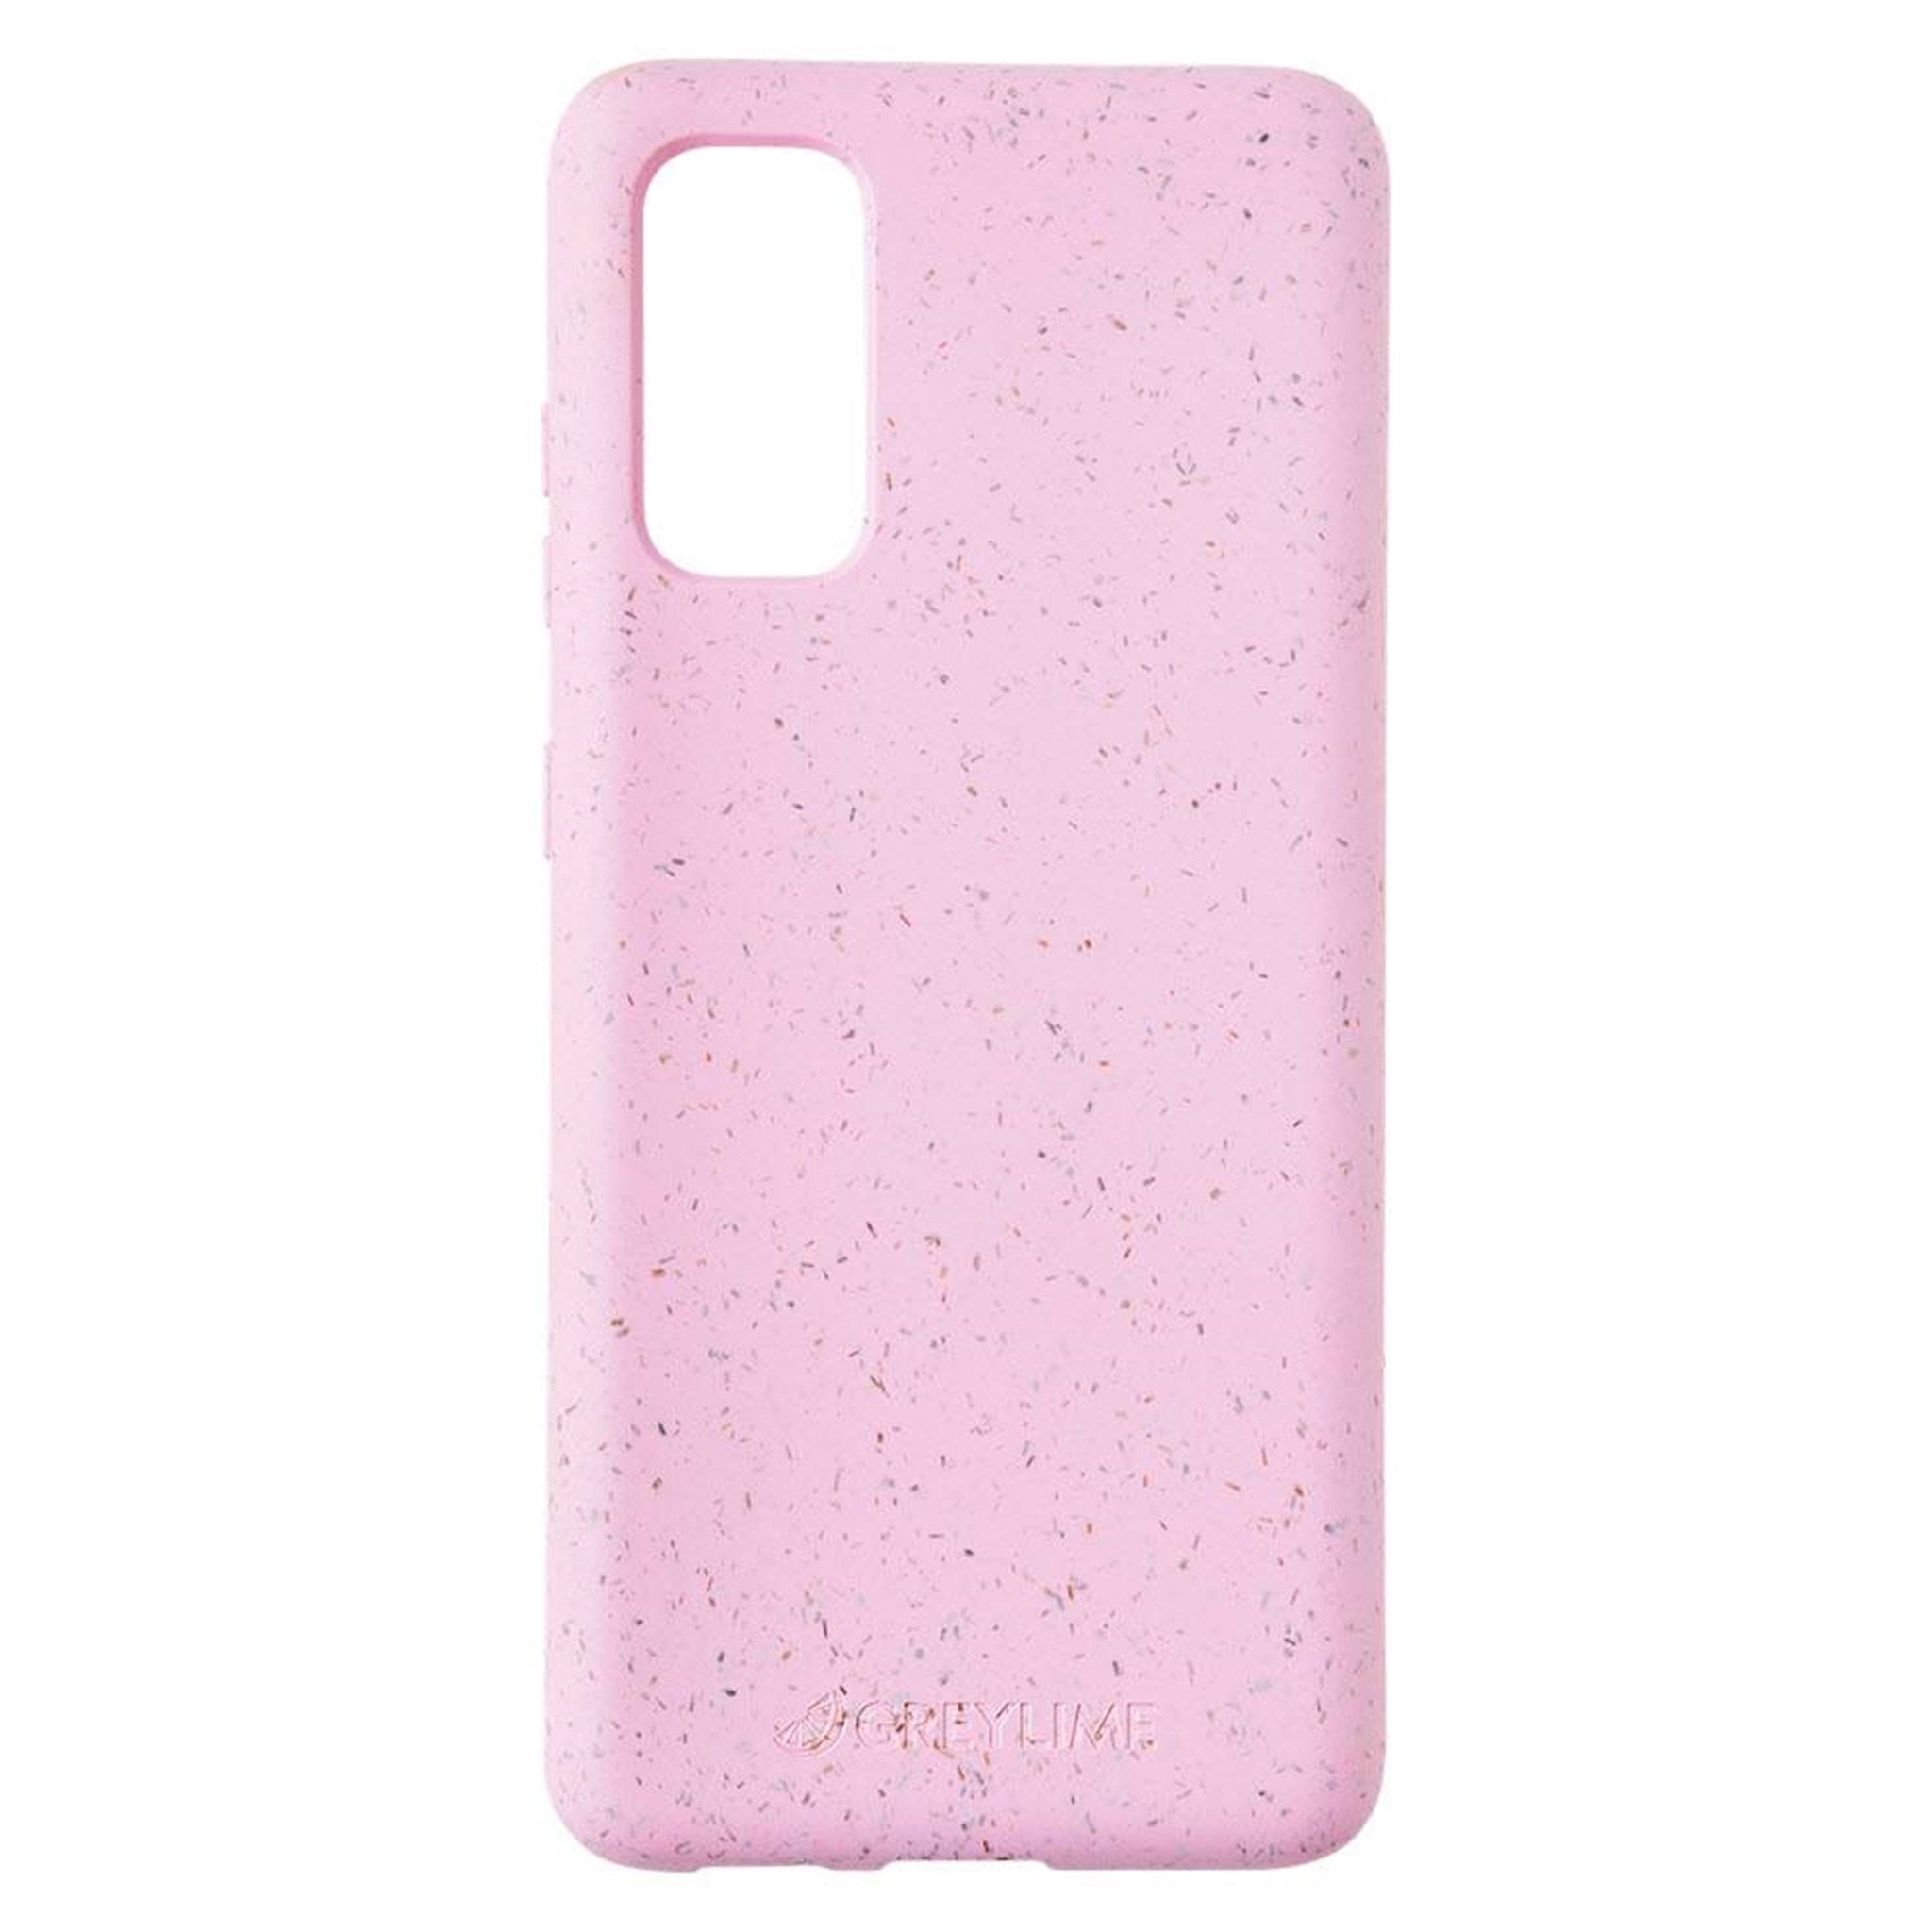 GreyLime-Samsung-Galaxy-S20-Biodegradable-Cover-Pink-COSAM2005-V3.jpg